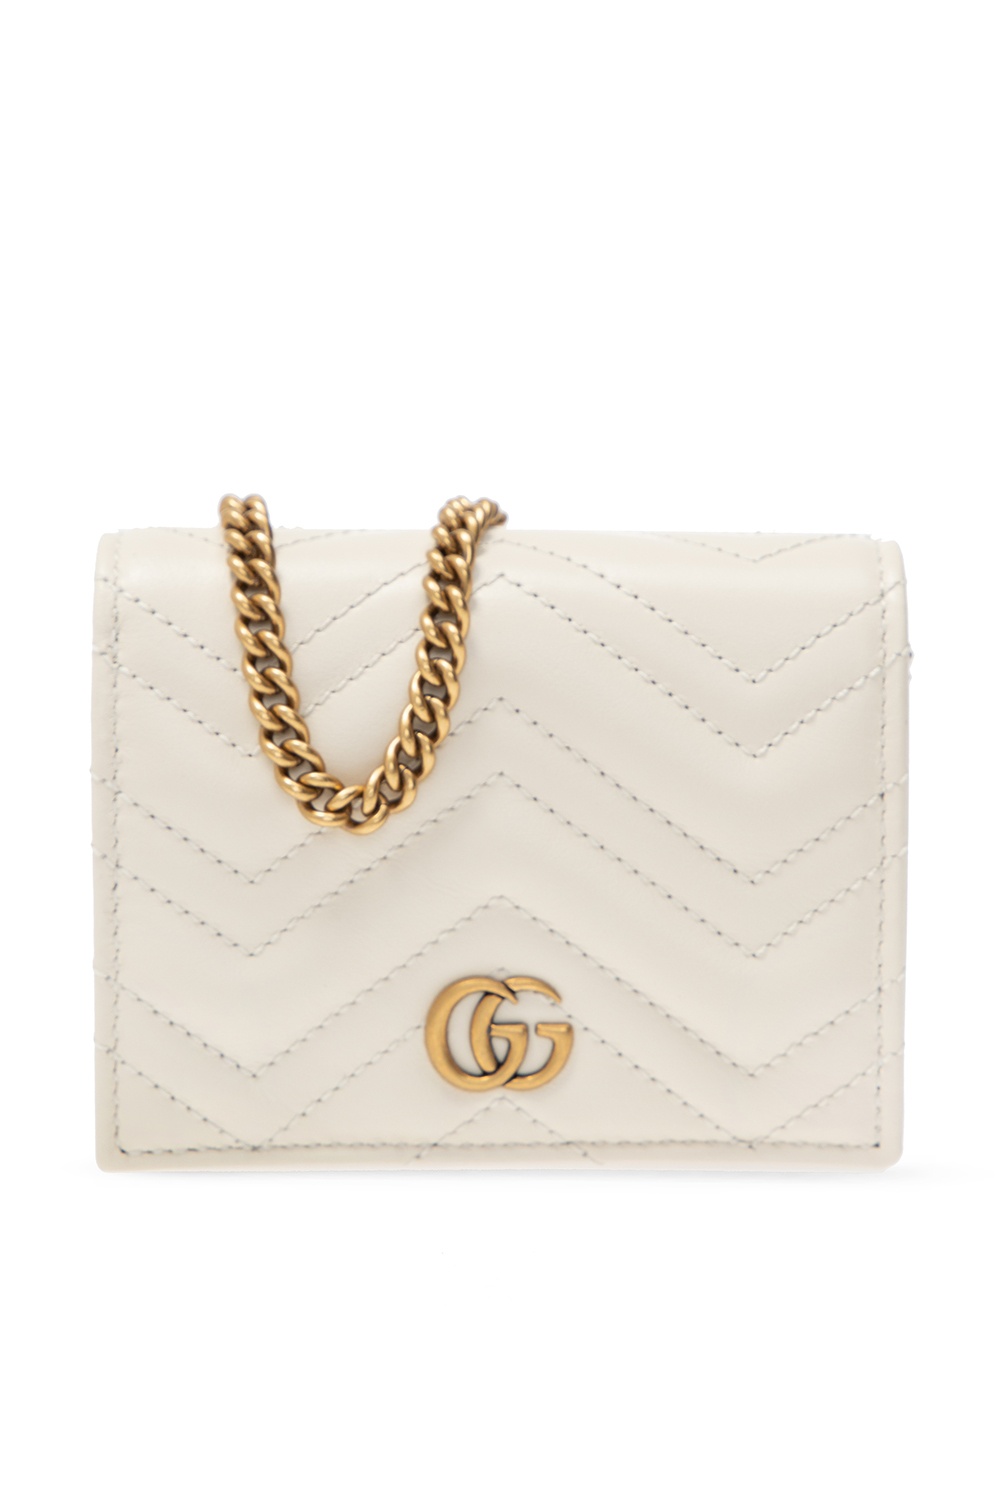 gucci gg marmont wallet on chain